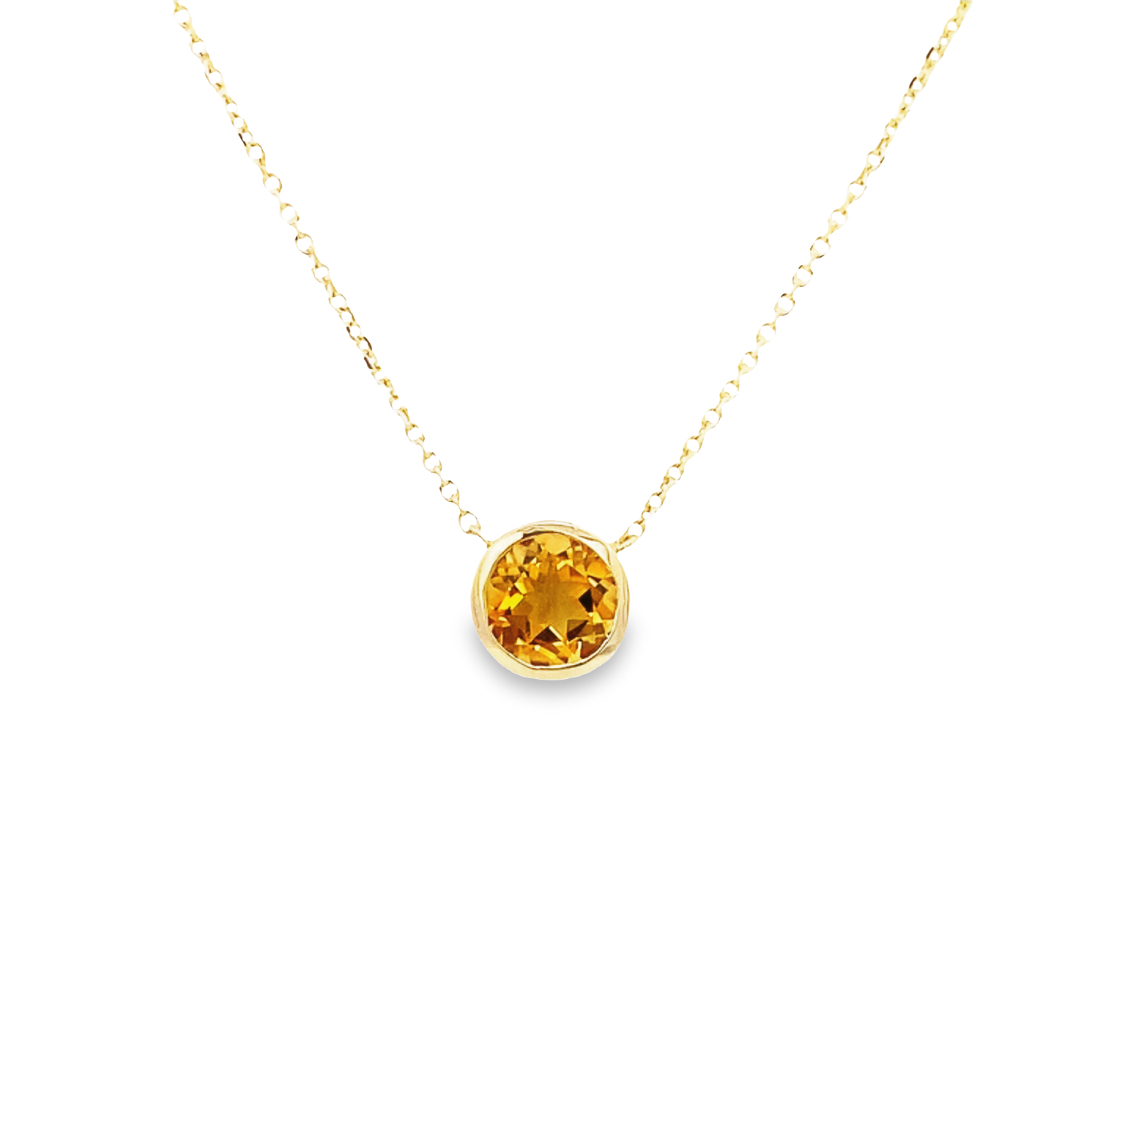 Natural Citrine Necklaces at Wholesale Prices from India's Most Trusted  Jeweler - Rananjay Exports